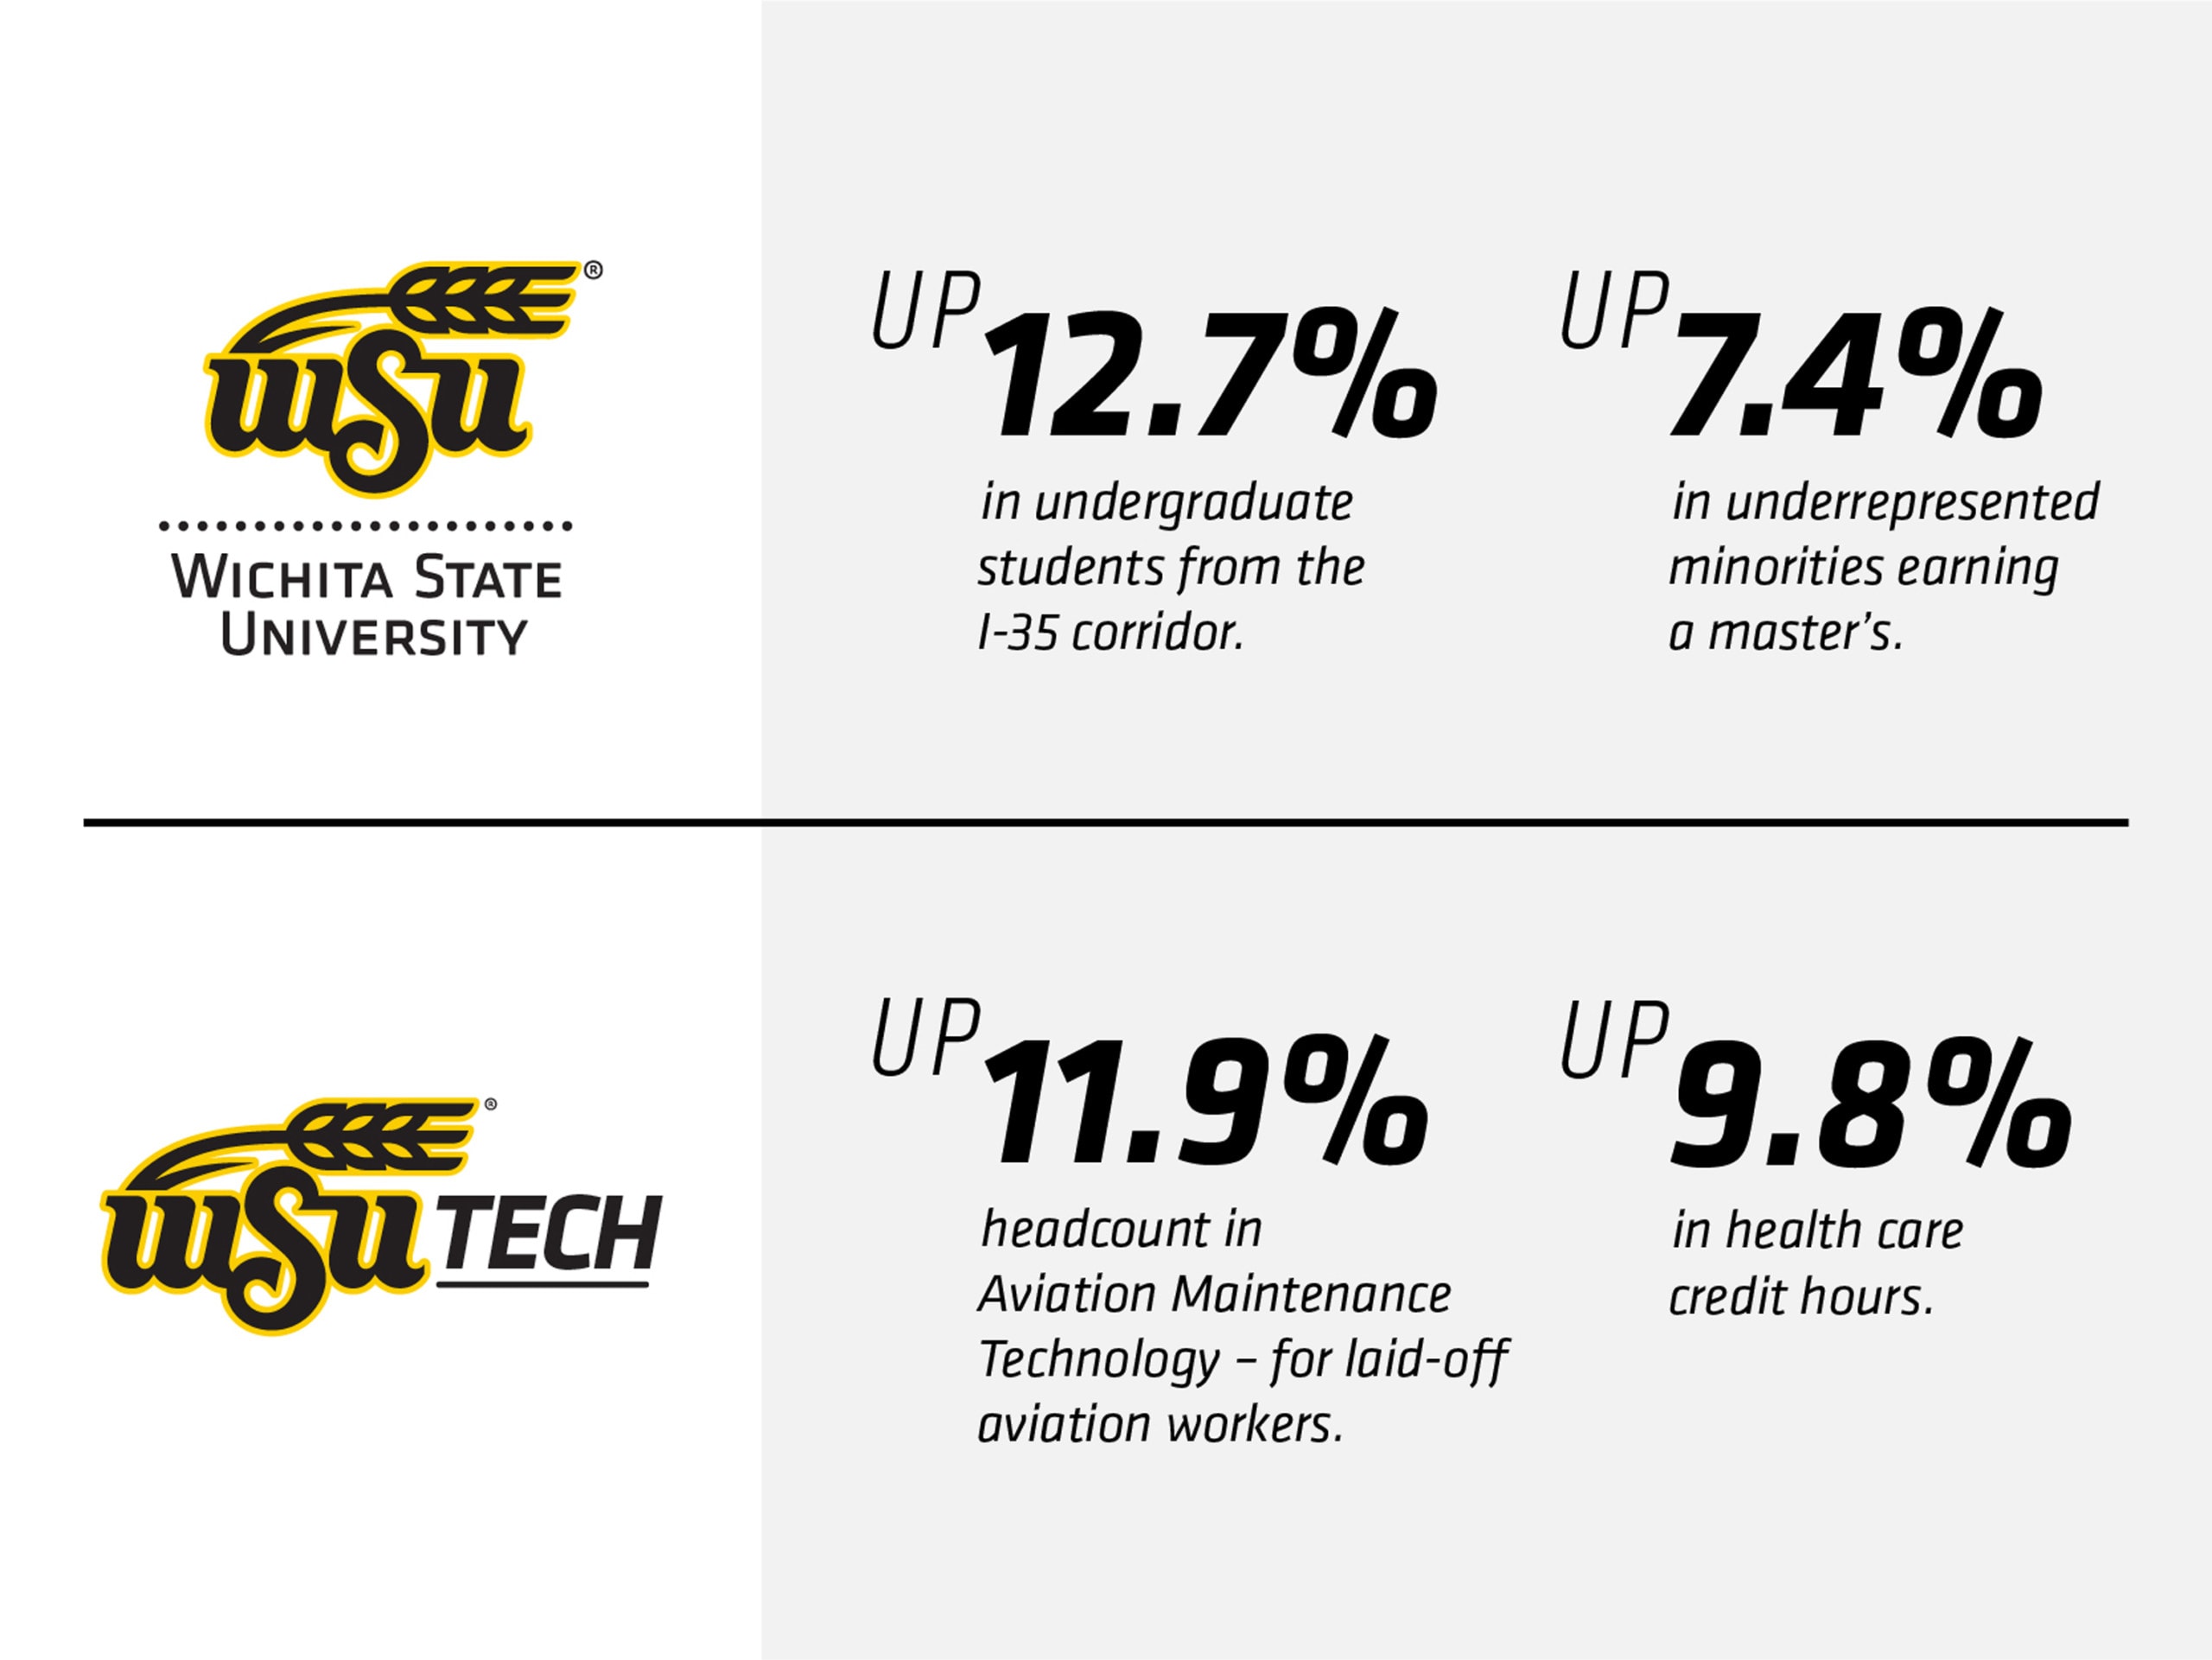 Wichita State University Logo. Up 12.7% in undergraduate students from the I-35 corridor. Up 7.4% in underrepresented minorities earning a master's. WSU Tech Logo. Up 11.9% headcount in Aviation Maintenance Technology - for laid-off aviation workers. Up 9.8% in health care credit hours. Learn more at wsu.news/enrollment20